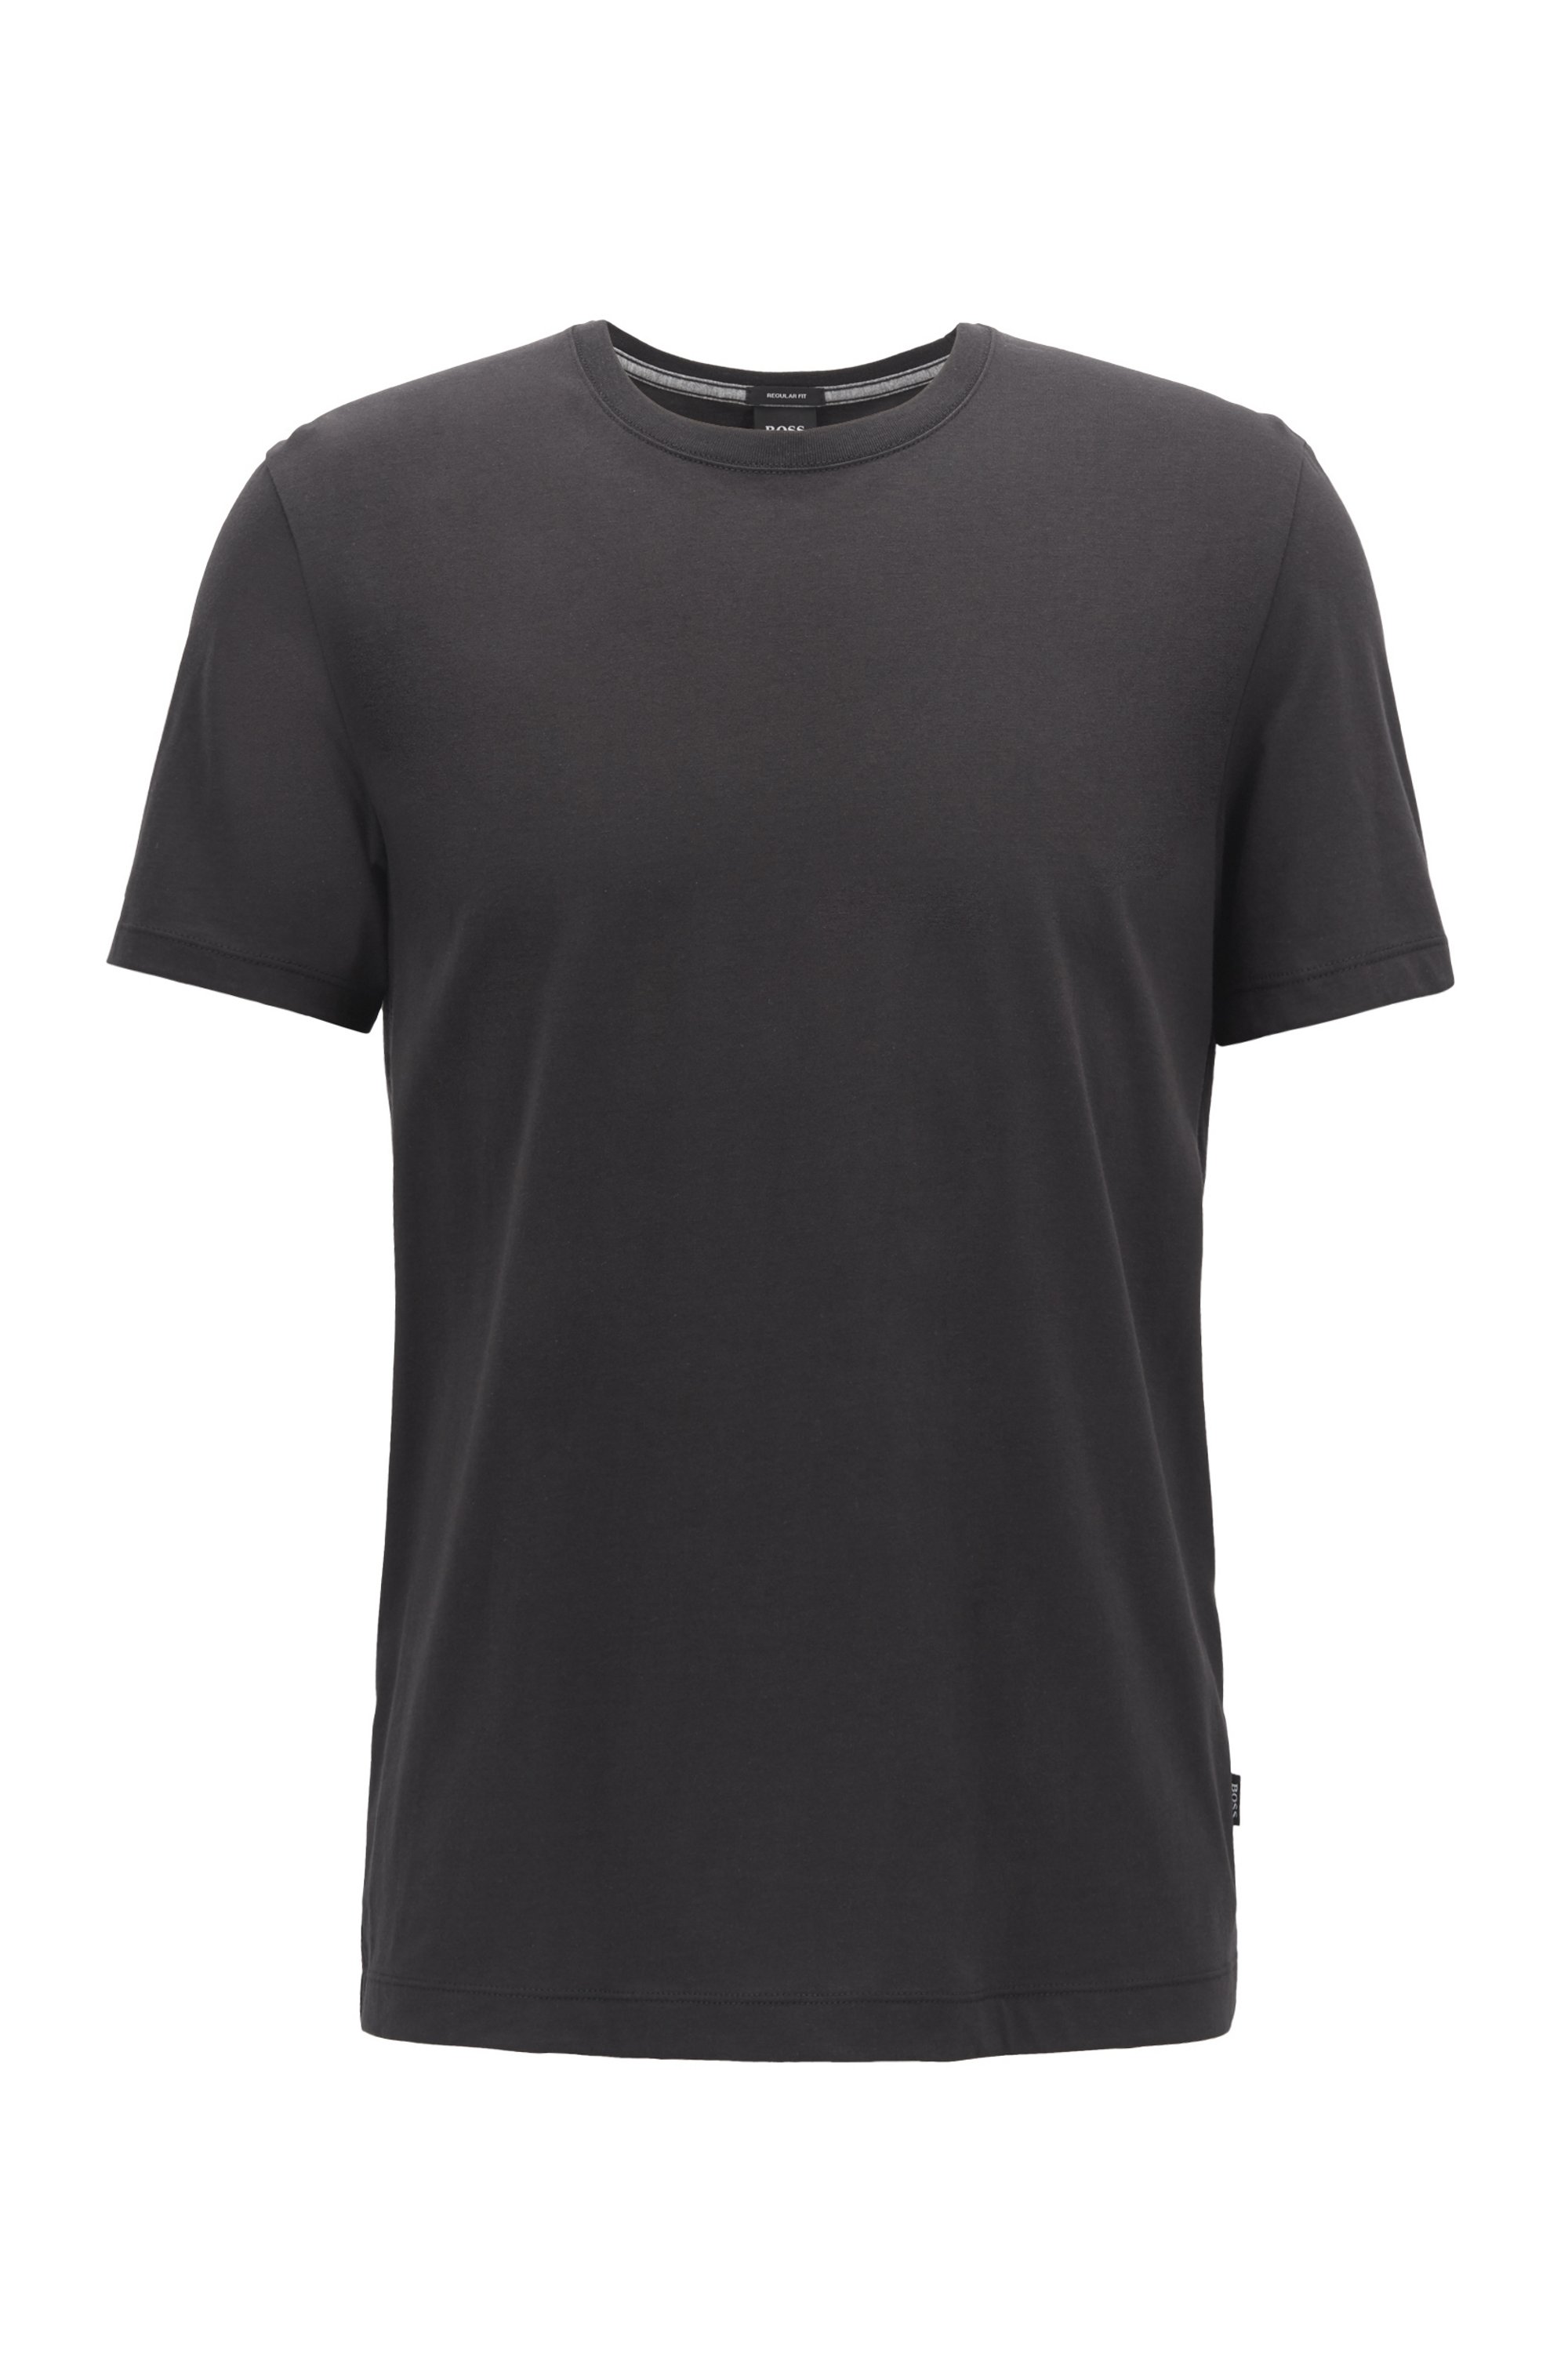 Crew-neck T-shirt in pure cotton with liquid finishing, Black